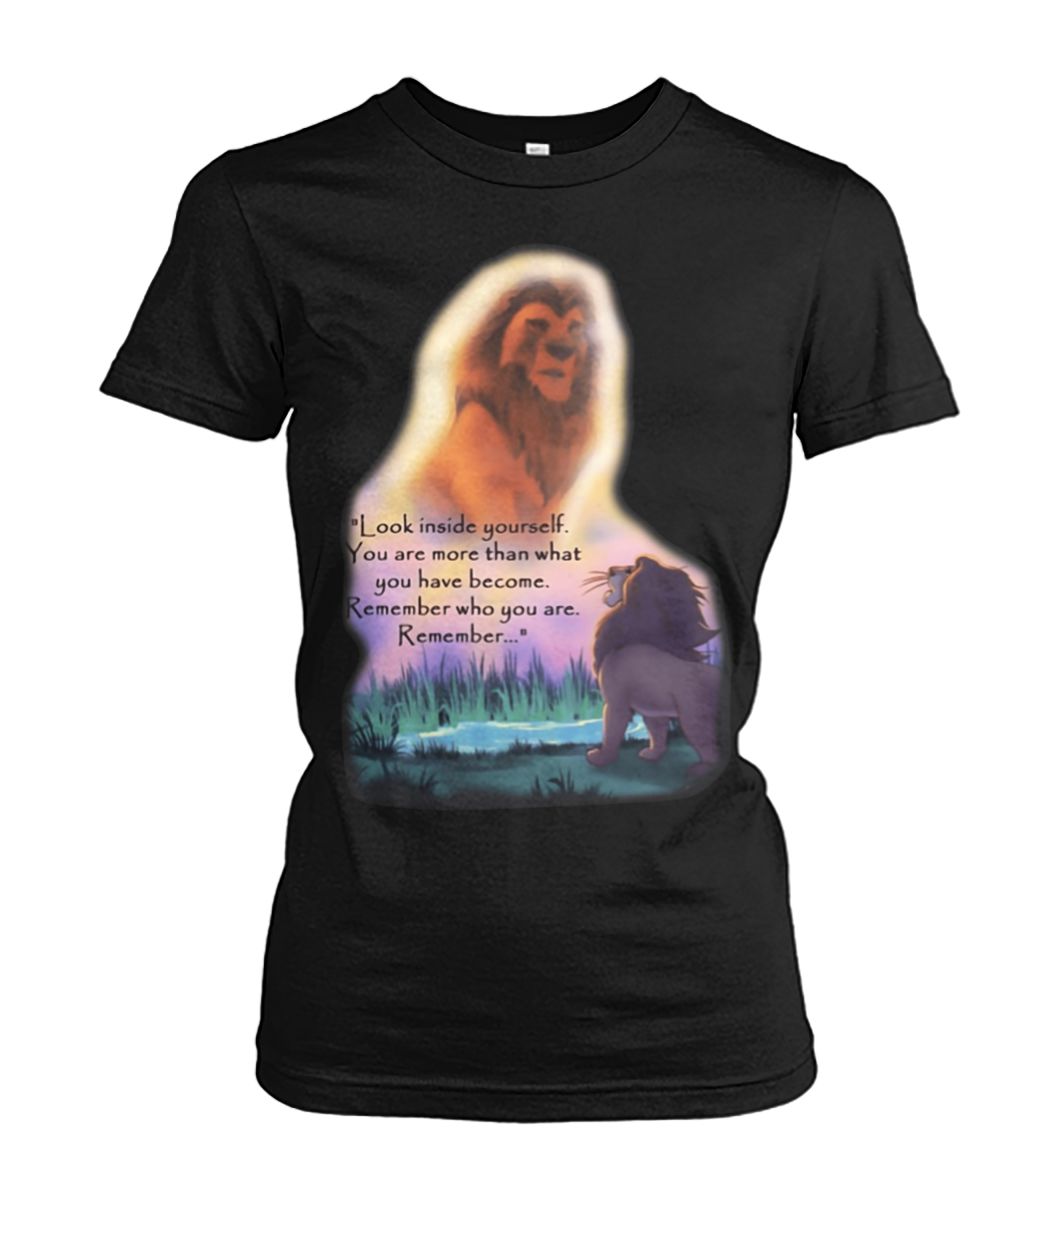 Look inside yourself you are more than what you have become the lion king women's cew tee